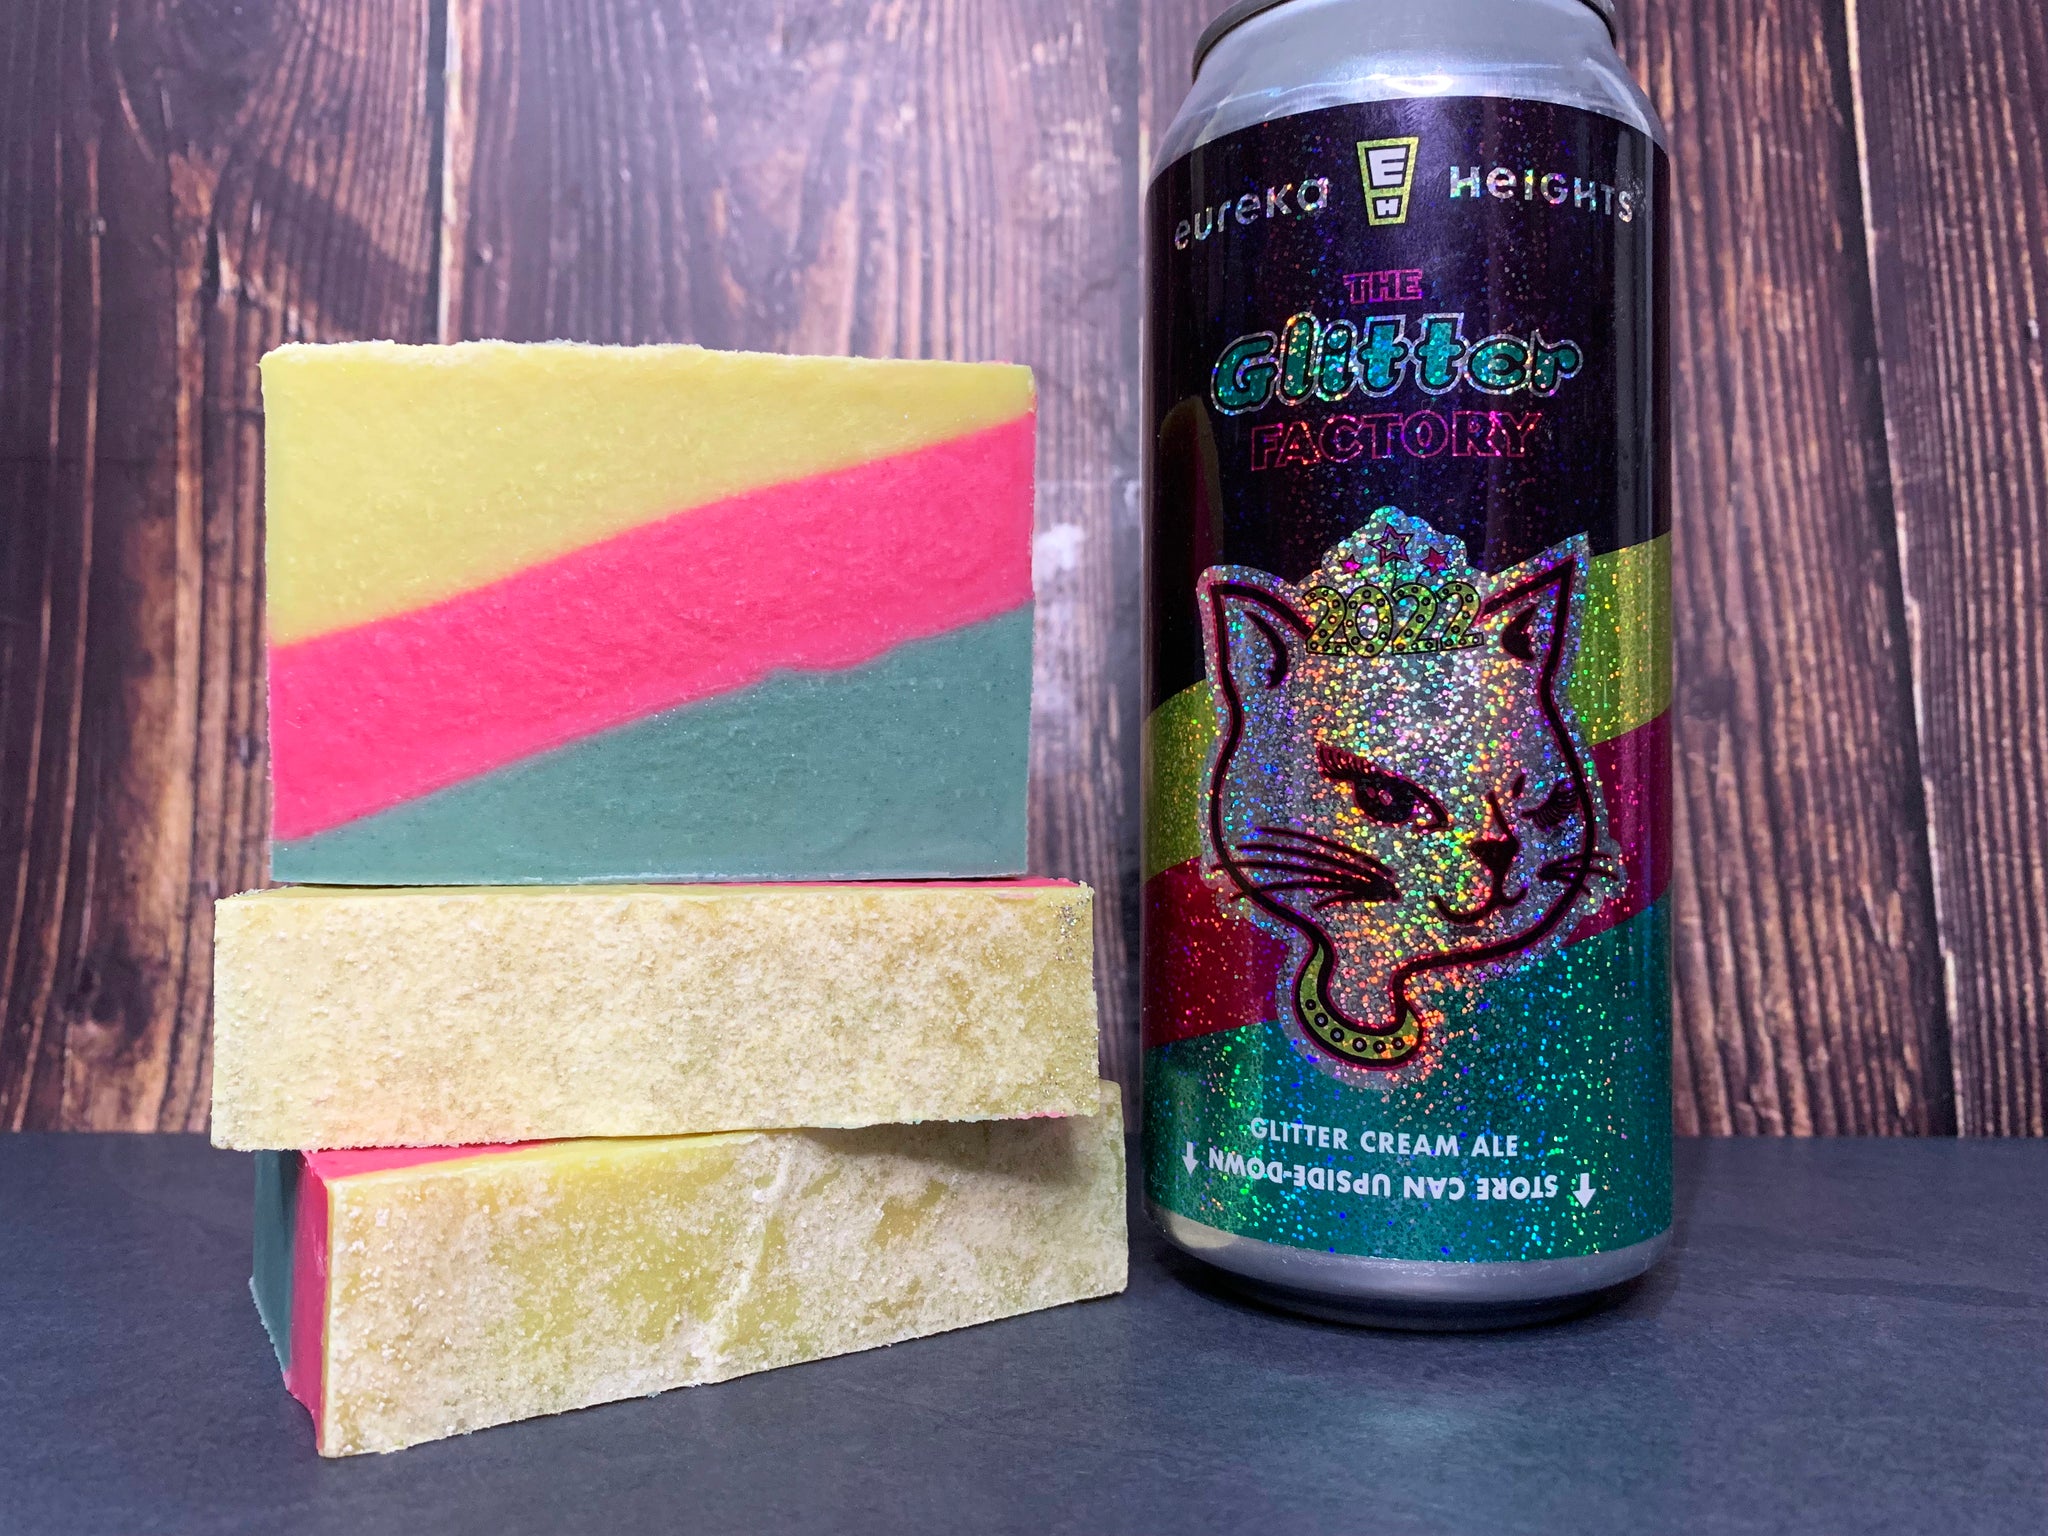 yellow pink and teal layered beer soap handcrafted with glitter factory glitter cream ale from eureka heights brewing company texas beer soap by spunkndisorderly craft beer soaps spunkndisorderly.com